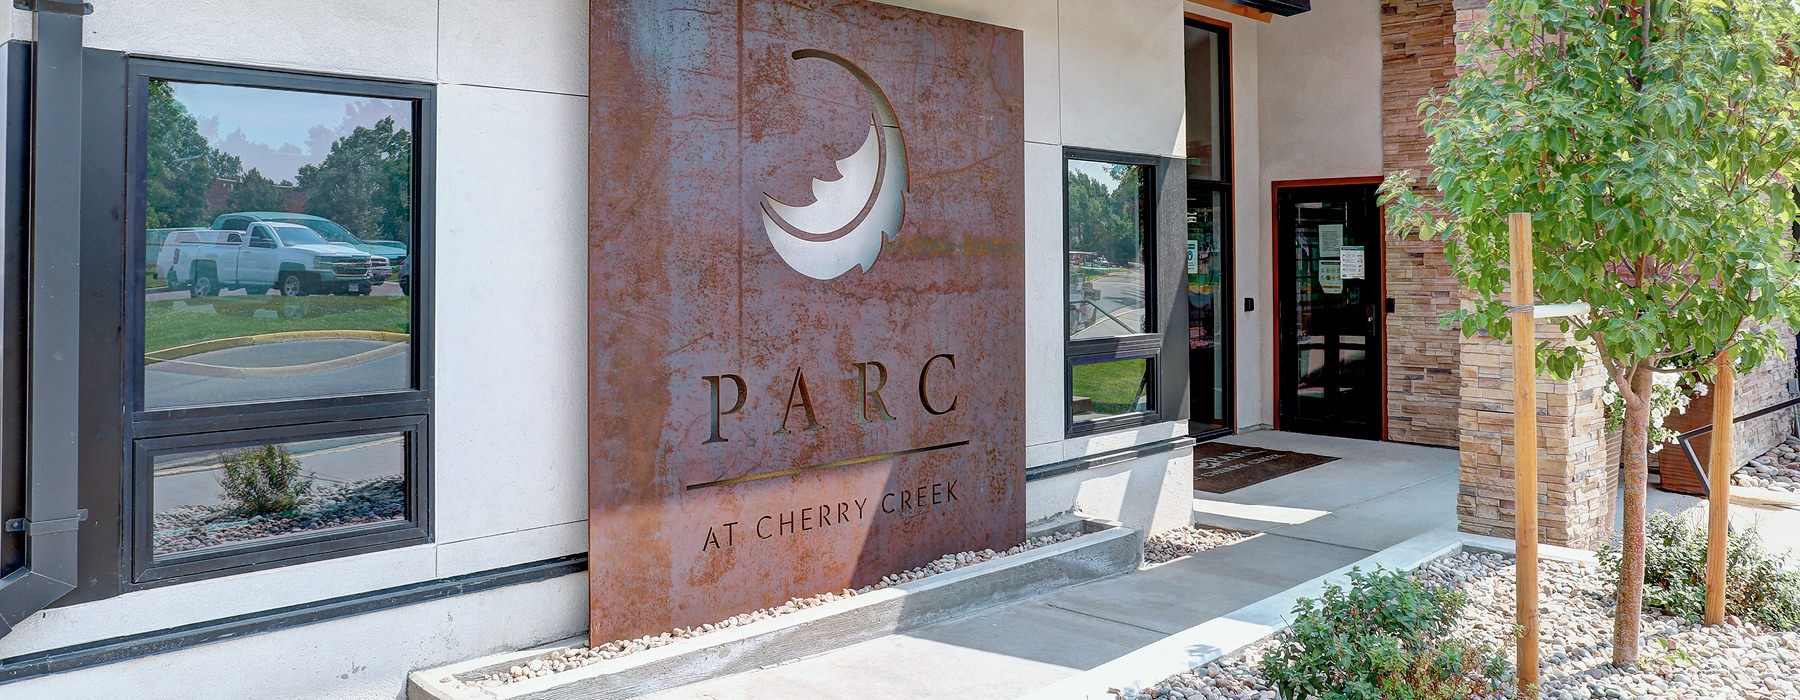 The Parc at Cherry Creek